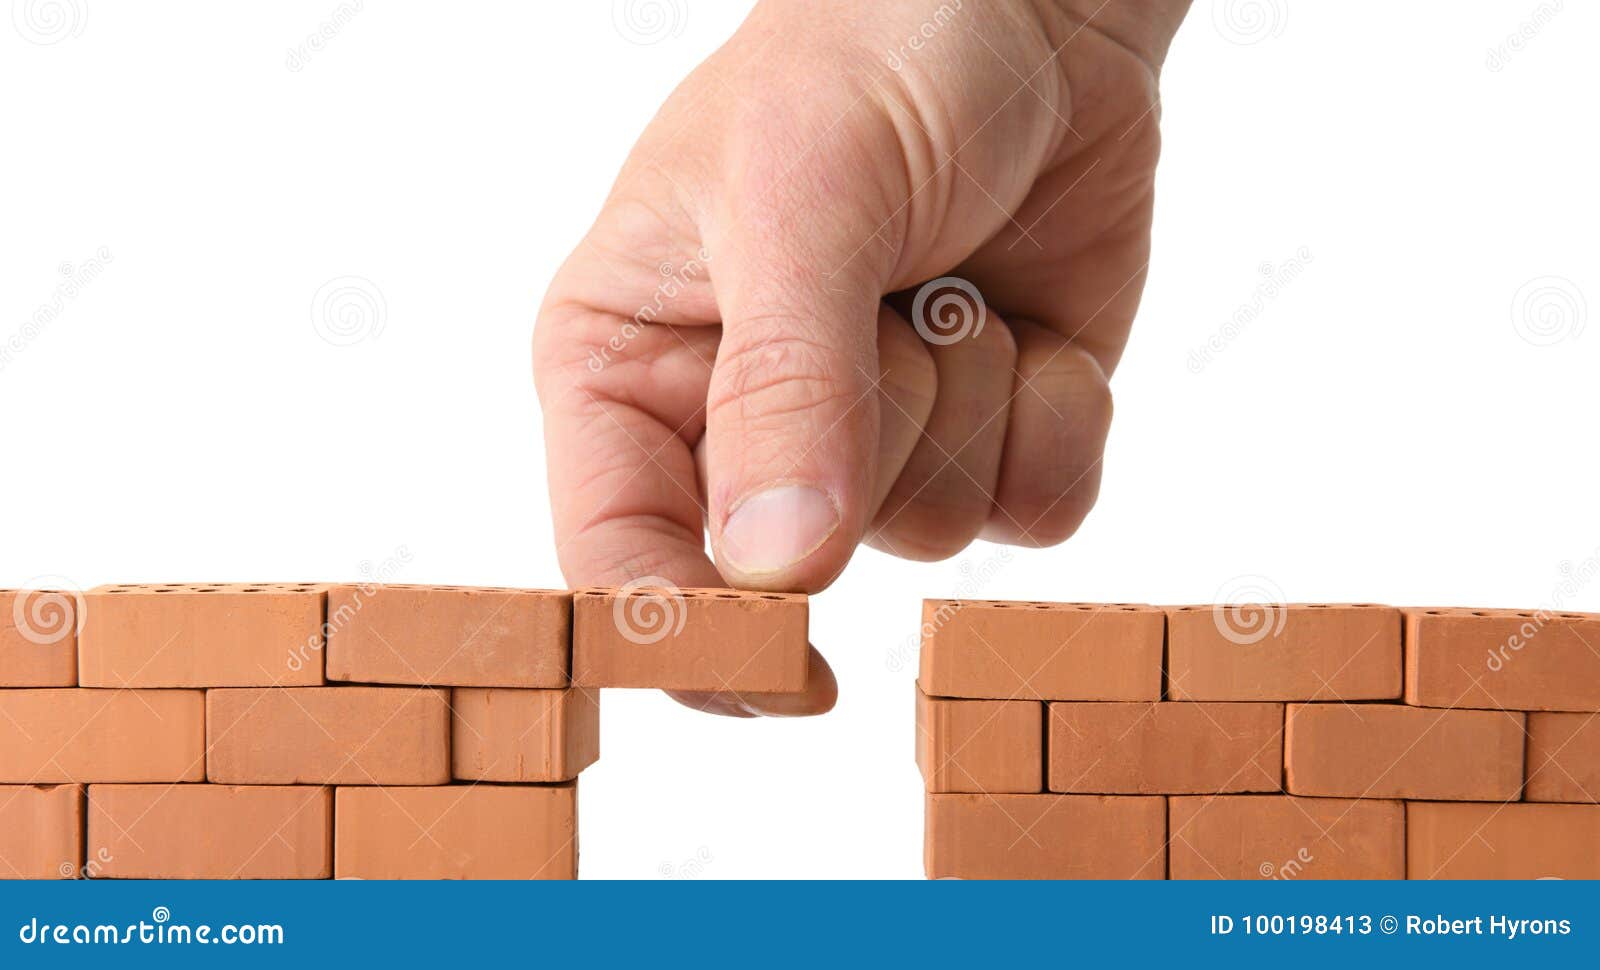 adding brick to a gap in the wall